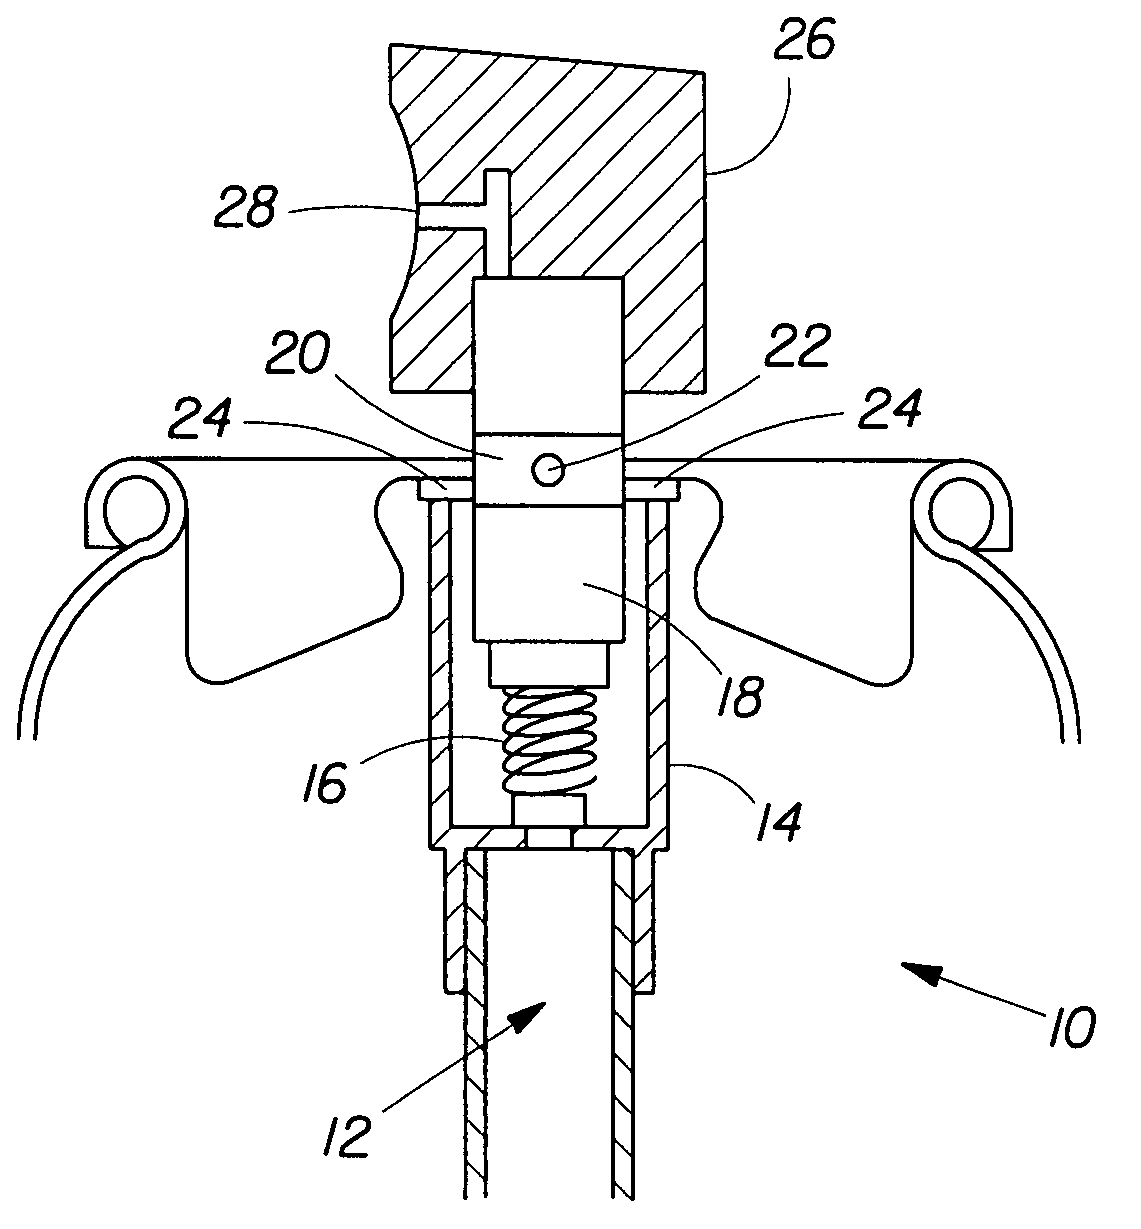 Aerosol product comprising a foaming concentrate composition comprising particulate materials